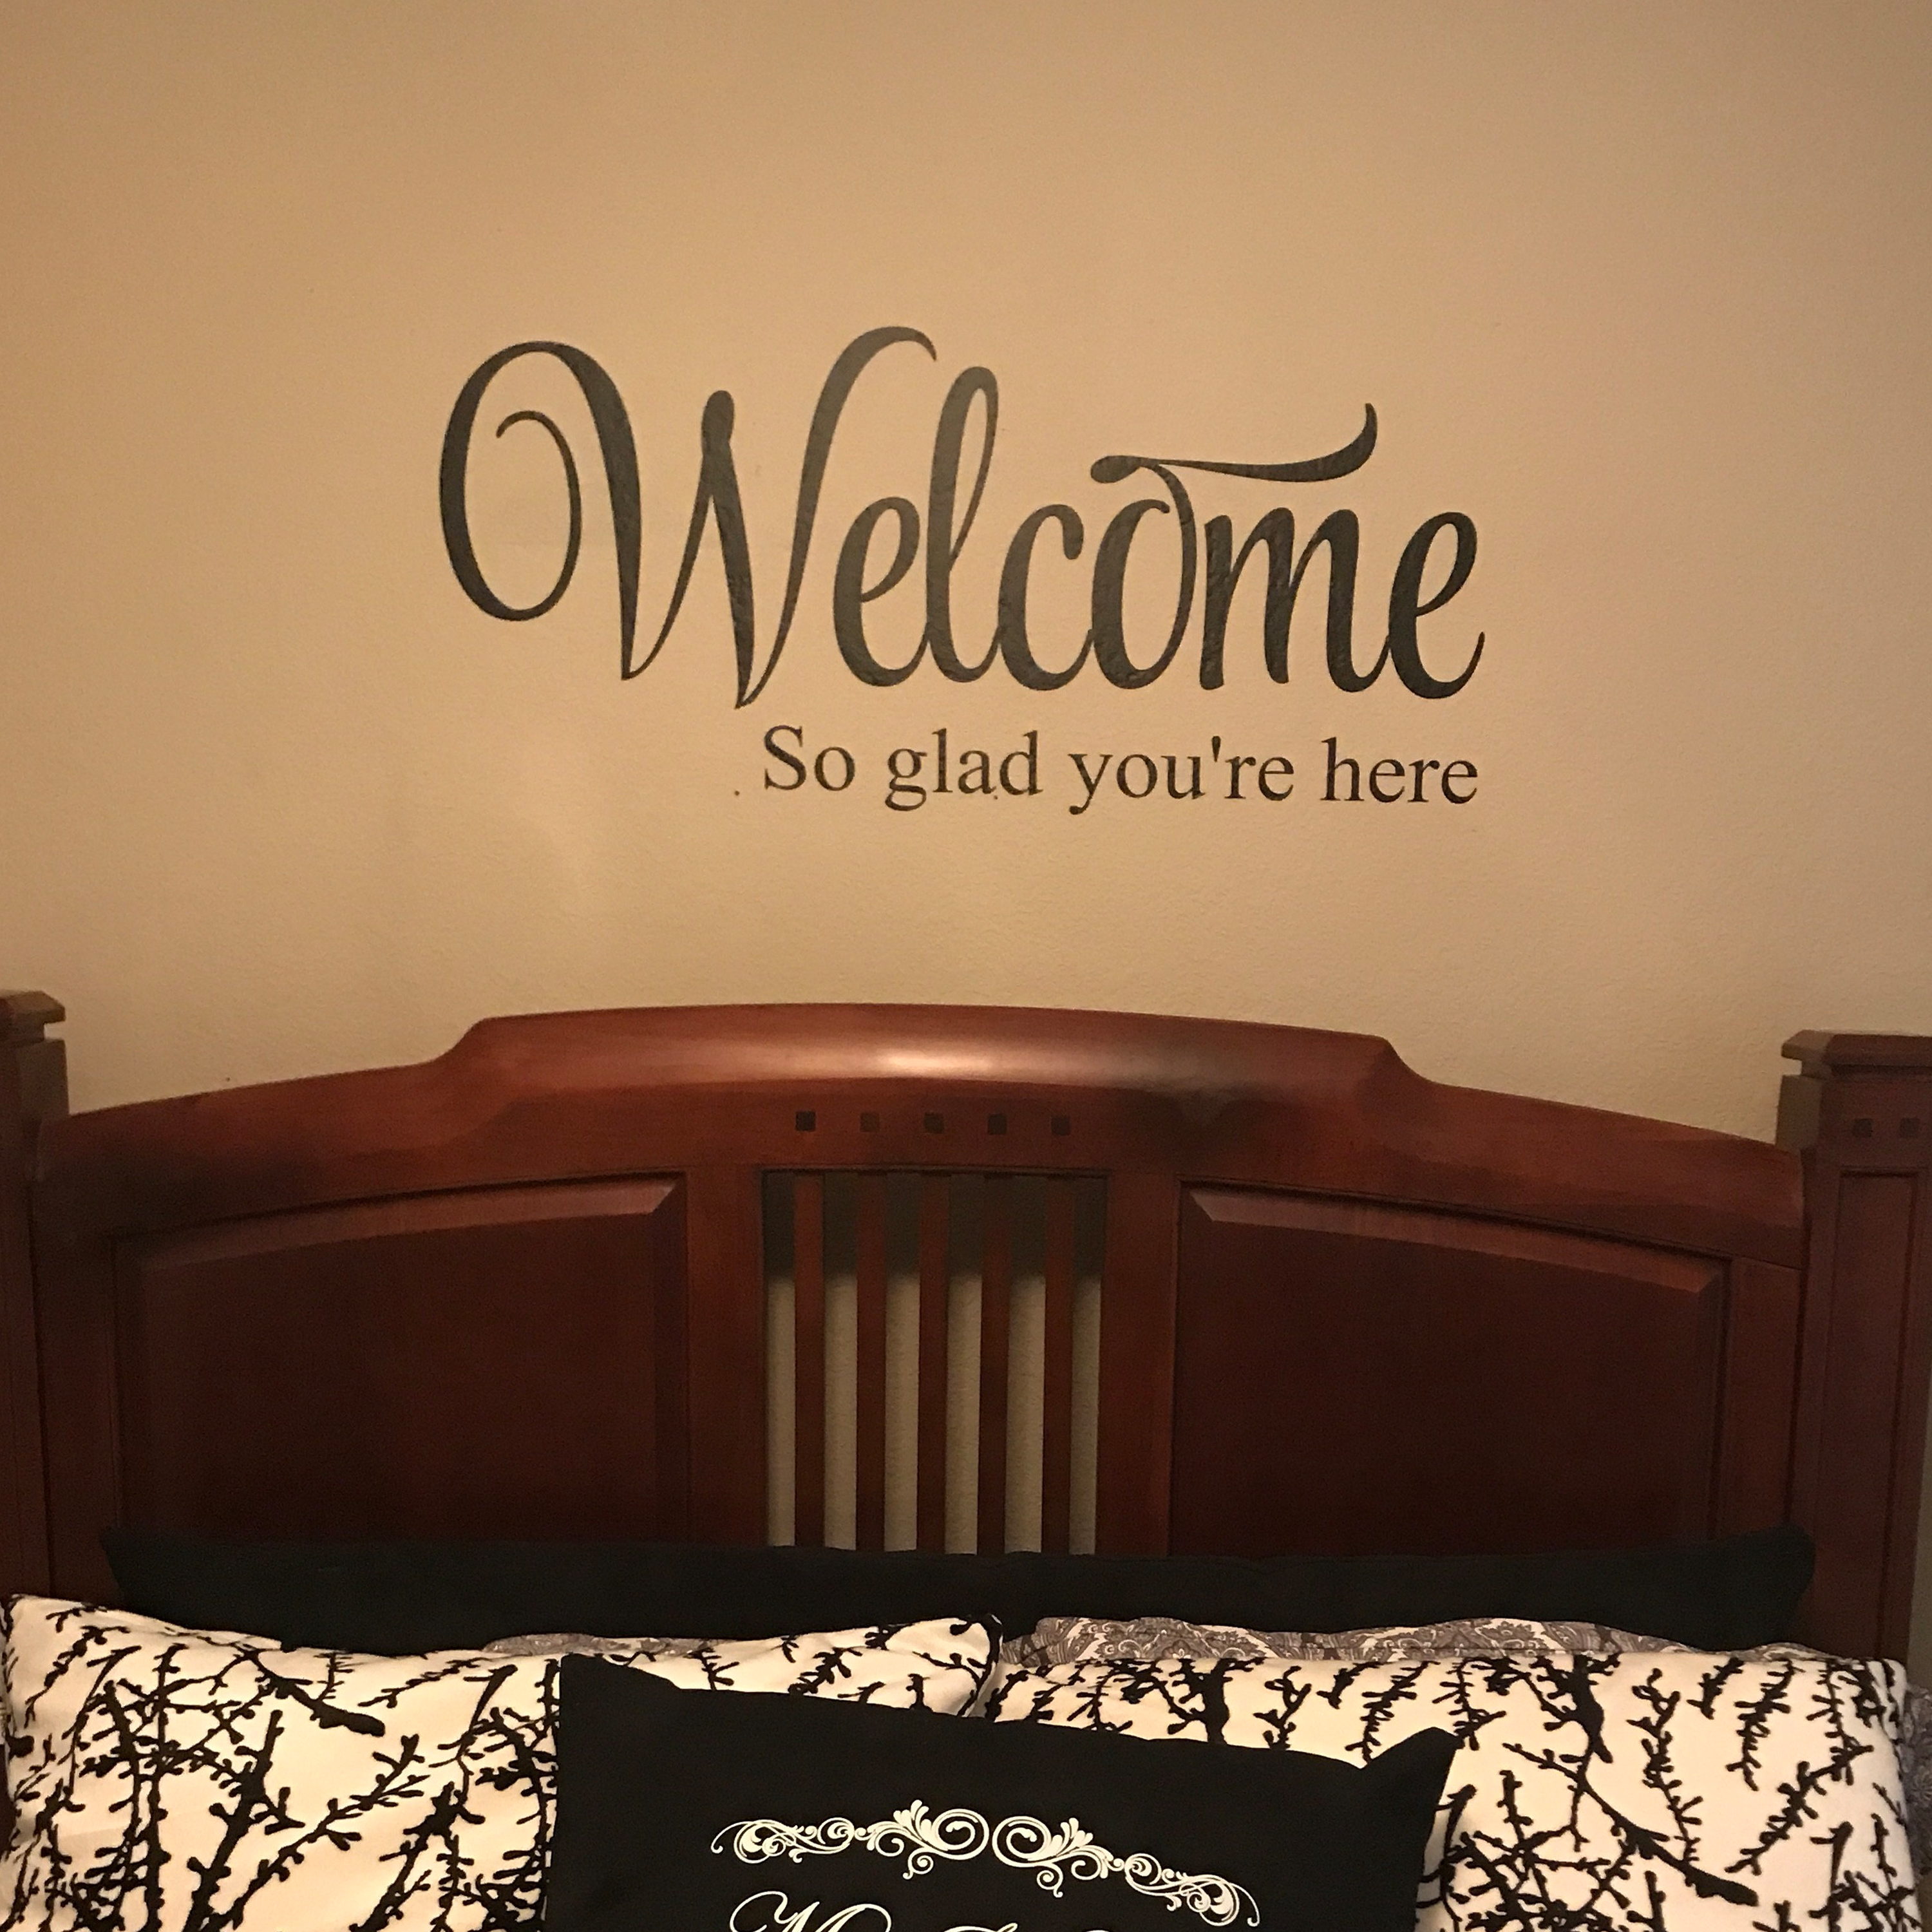 Welcome So Glad You Re Here Vinyl Wall Decal By Wild Eyes Signs Entry Wall Art Family Living Room Wall Entrance Way Guest Bedroom Decor Welcome